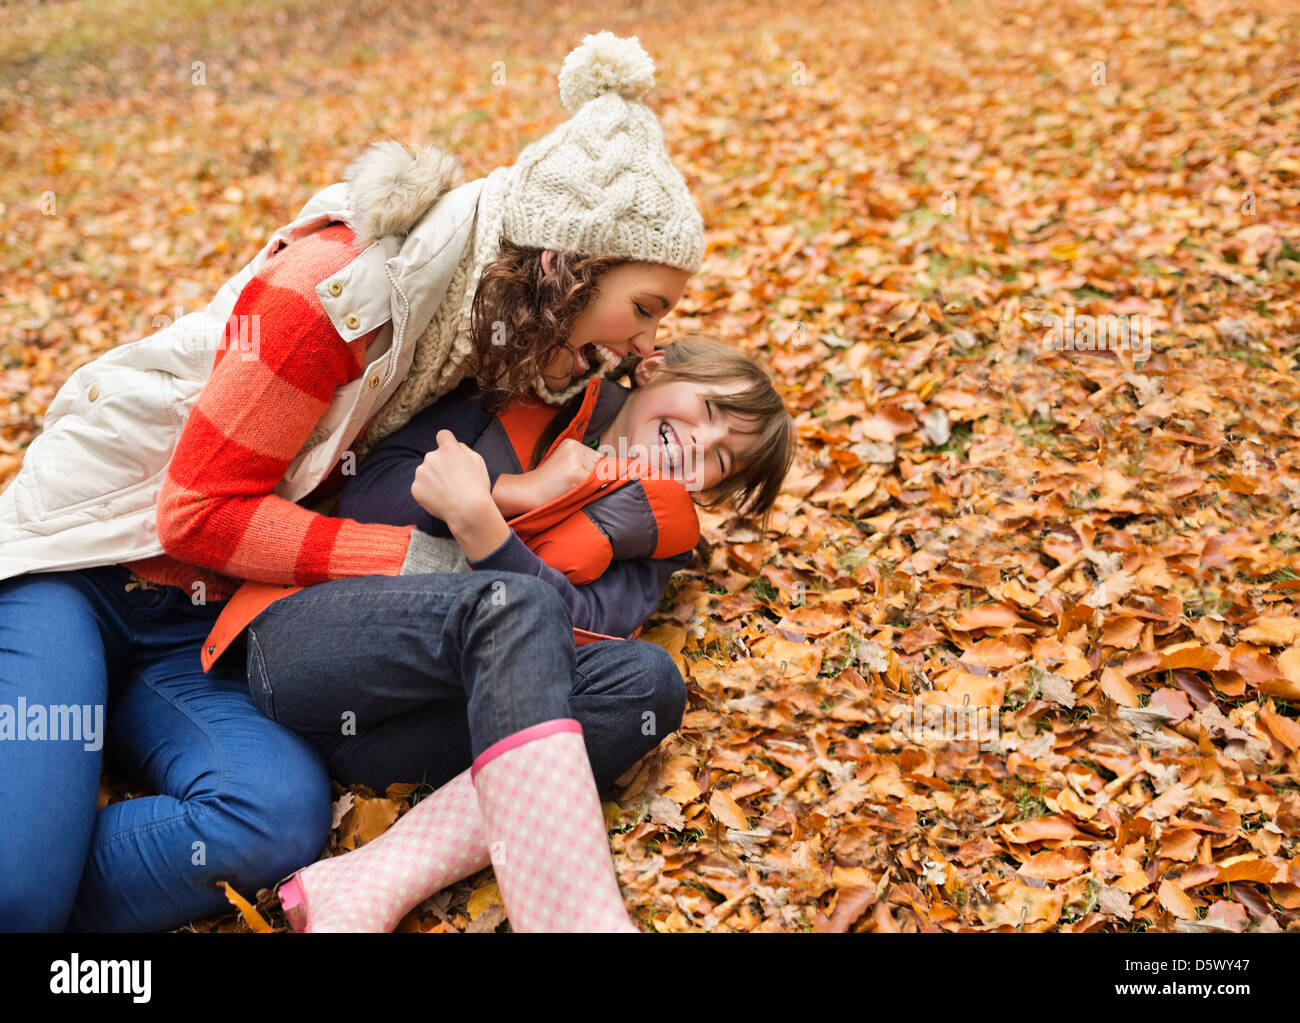 Mother and daughter playing in autumn leaves Stock Photo